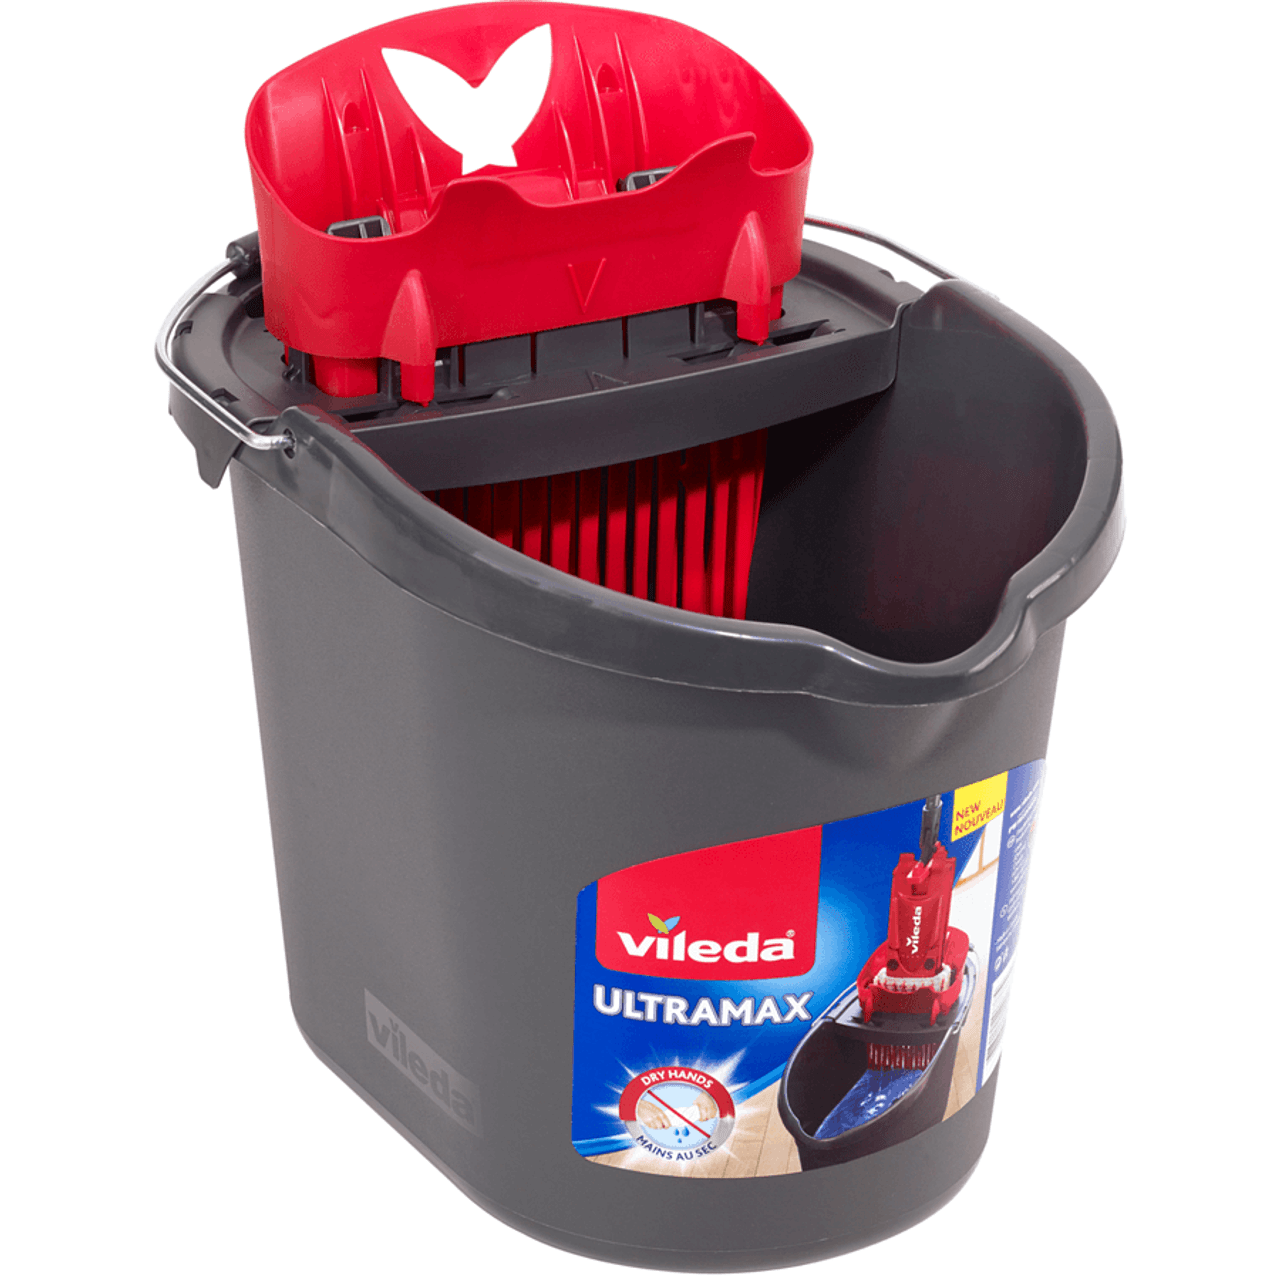 Versatile Use: Ideal for all surfaces without leaving scratches or residue.-Chicken Pieces